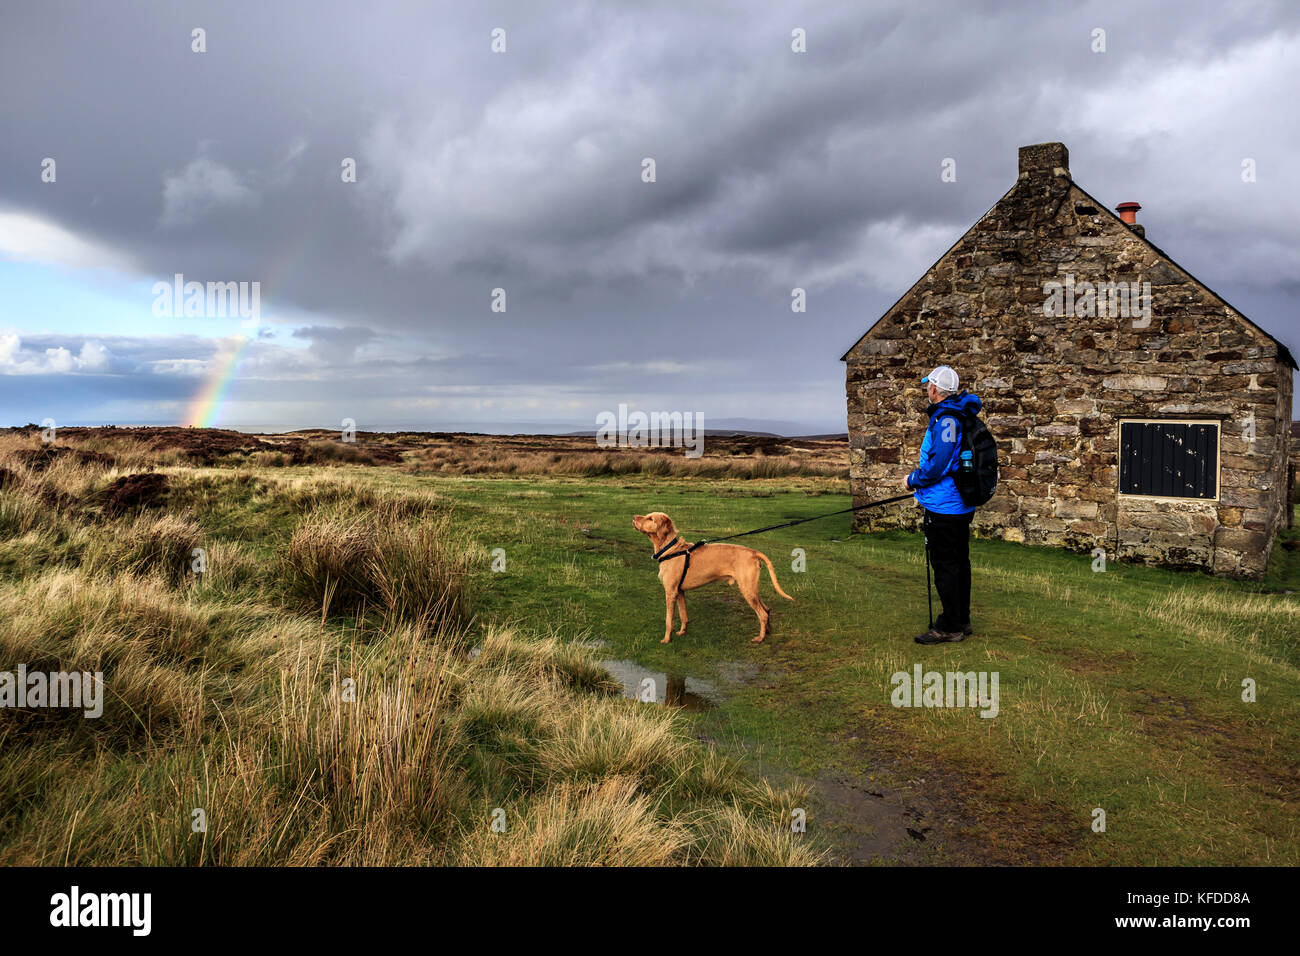 Walker looking at stormy skies and a rainbow with his dog by Trough house, an old shooting lodge on  Great Fryup Dale, North York Moors National Park Yorkshire England Stock Photo